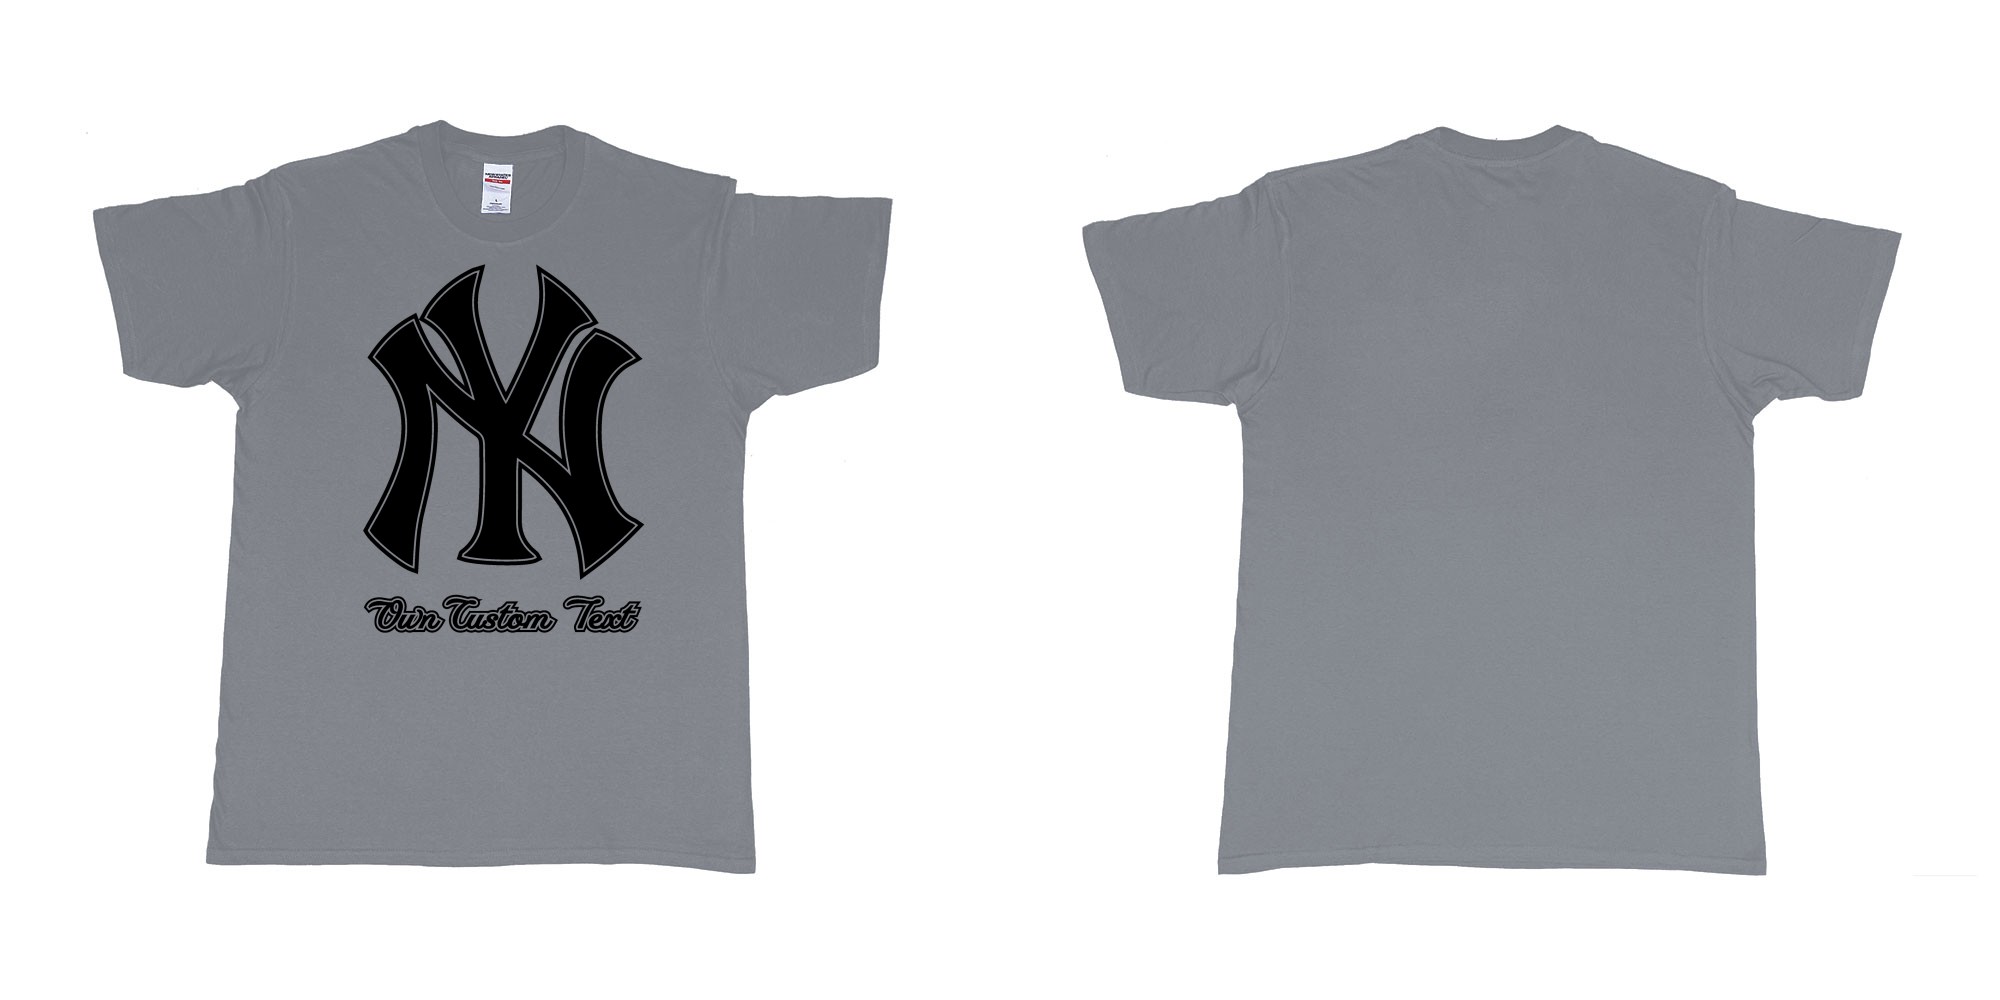 Custom tshirt design new york yankees baseball team custom design in fabric color misty choice your own text made in Bali by The Pirate Way